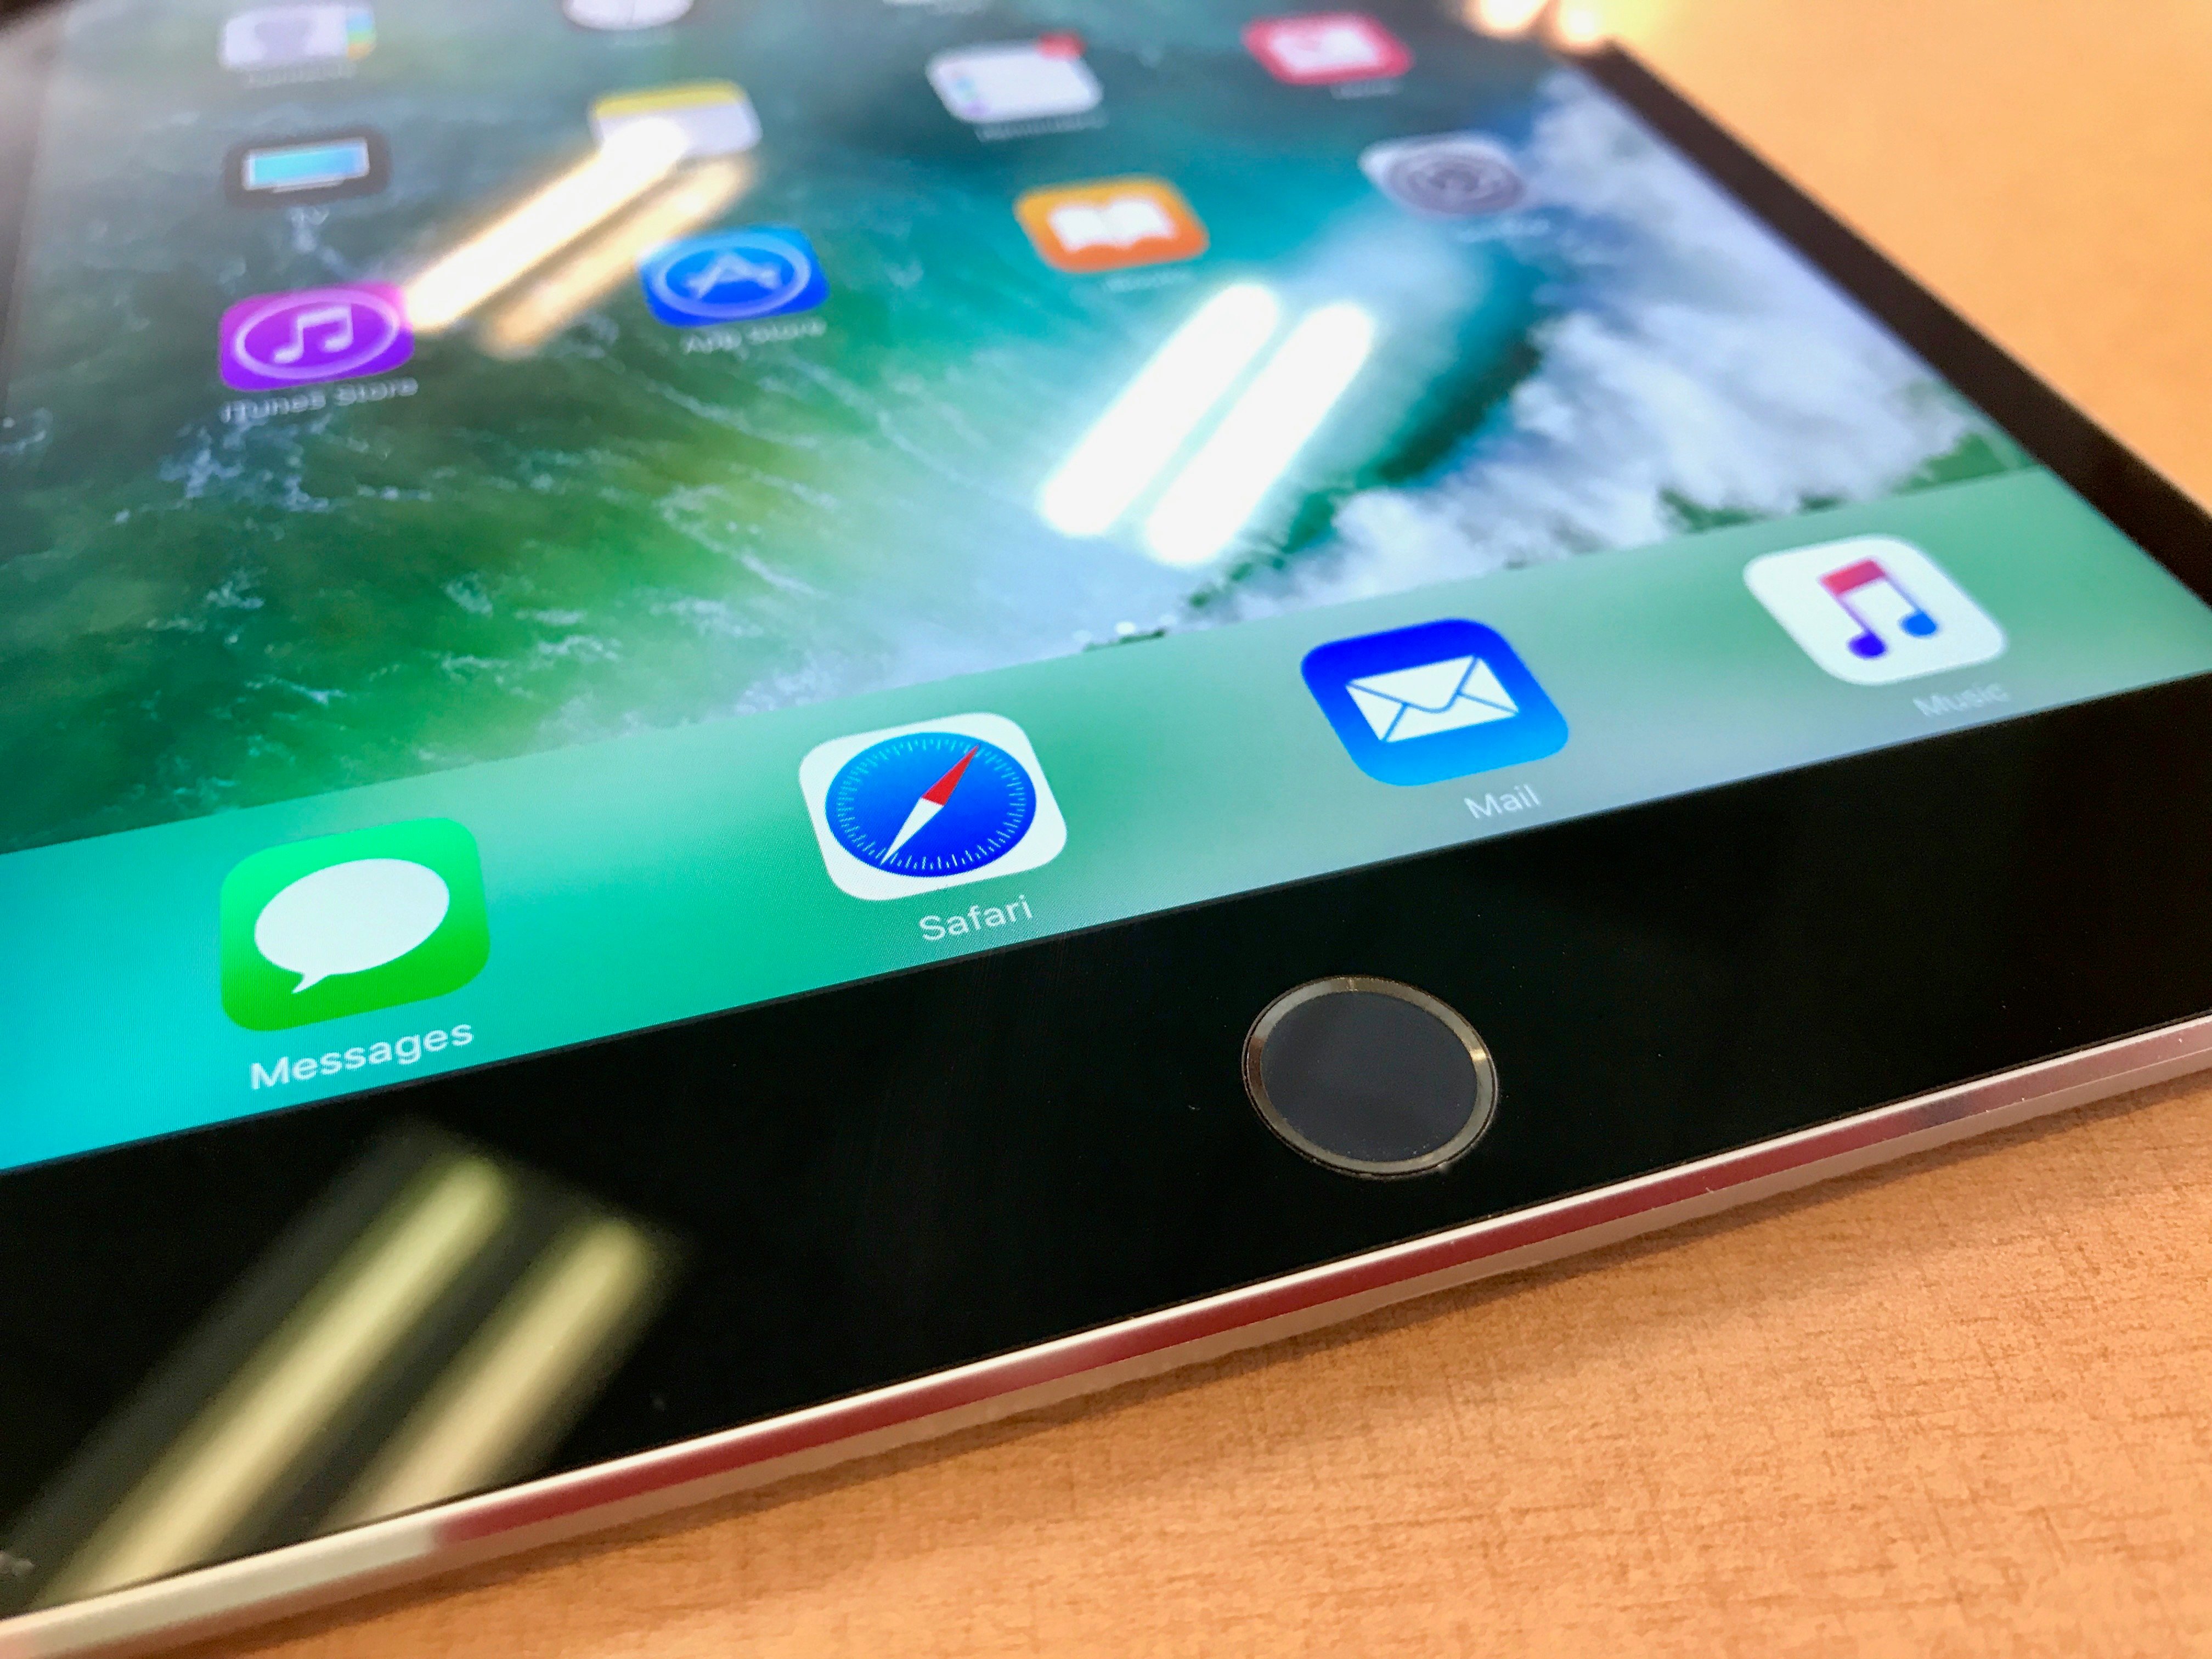 ipad mini 4 home button and touch ID